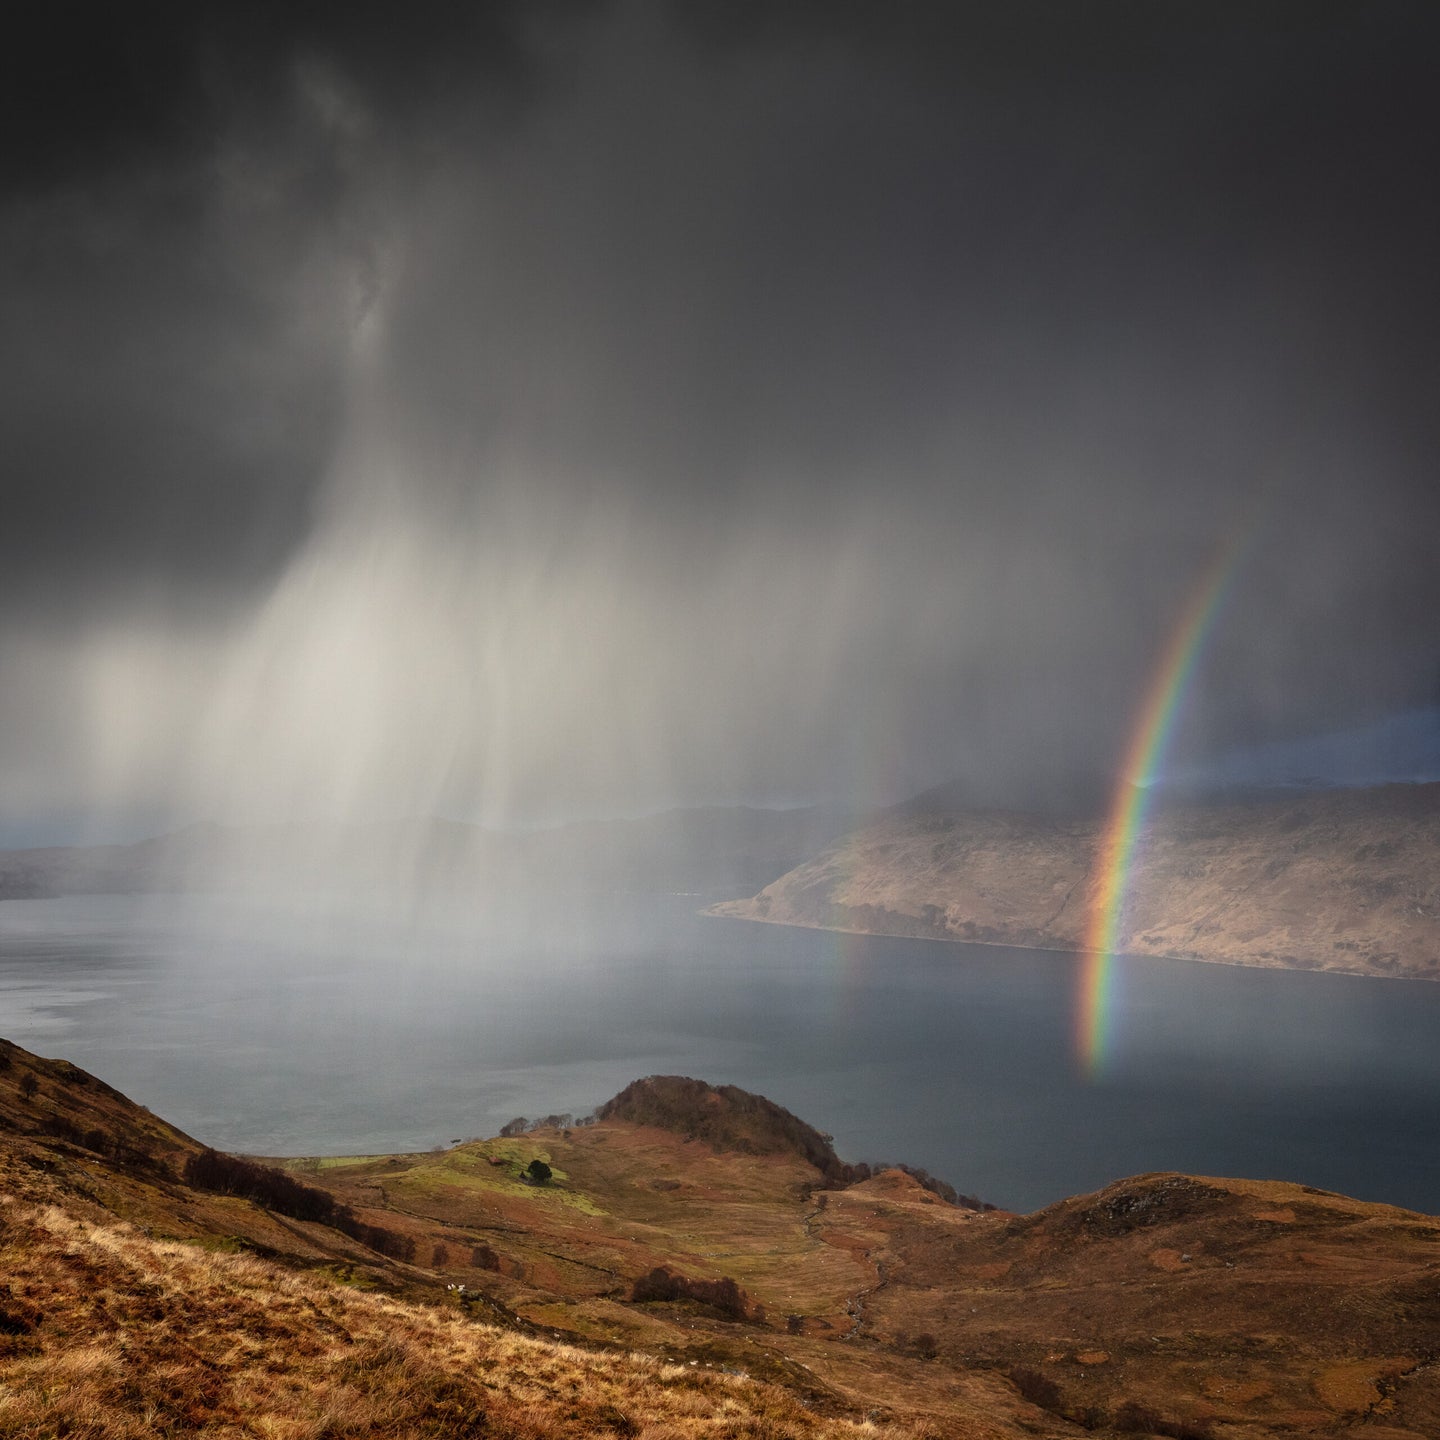 Scottish sublime. North Morar in the foreground with Knoydart behind the rainbow over Loch Nevis.